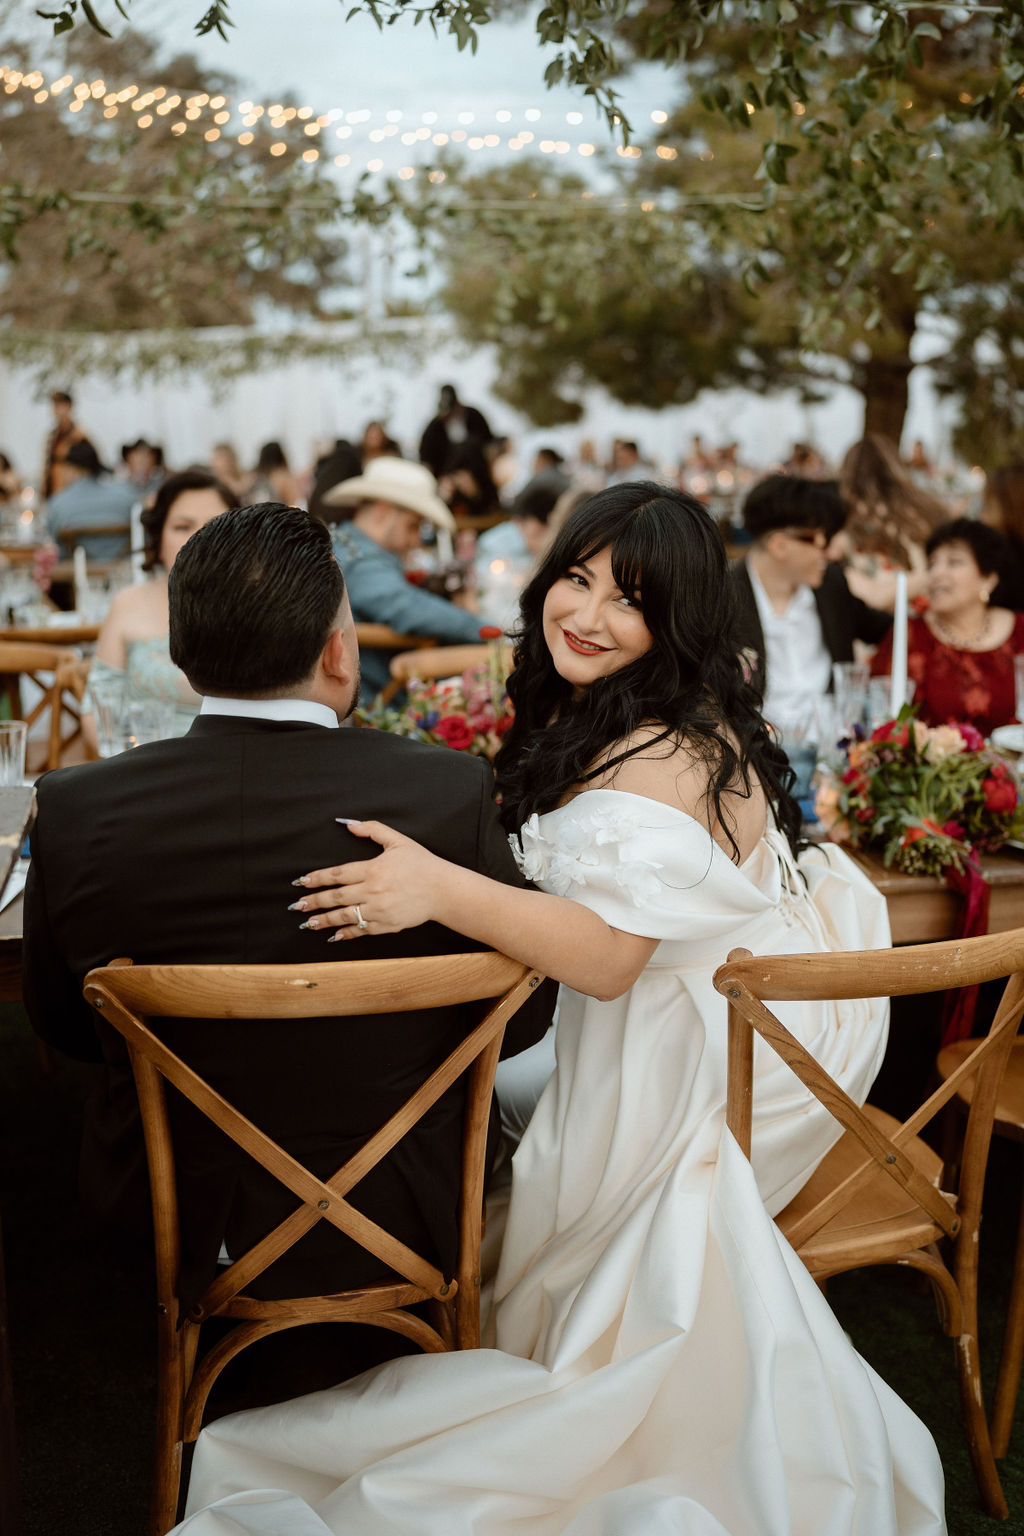 Bride in a white dress smiling and seated at a wedding reception, looking over her shoulder at the camera while resting her hand on a man's shoulder.